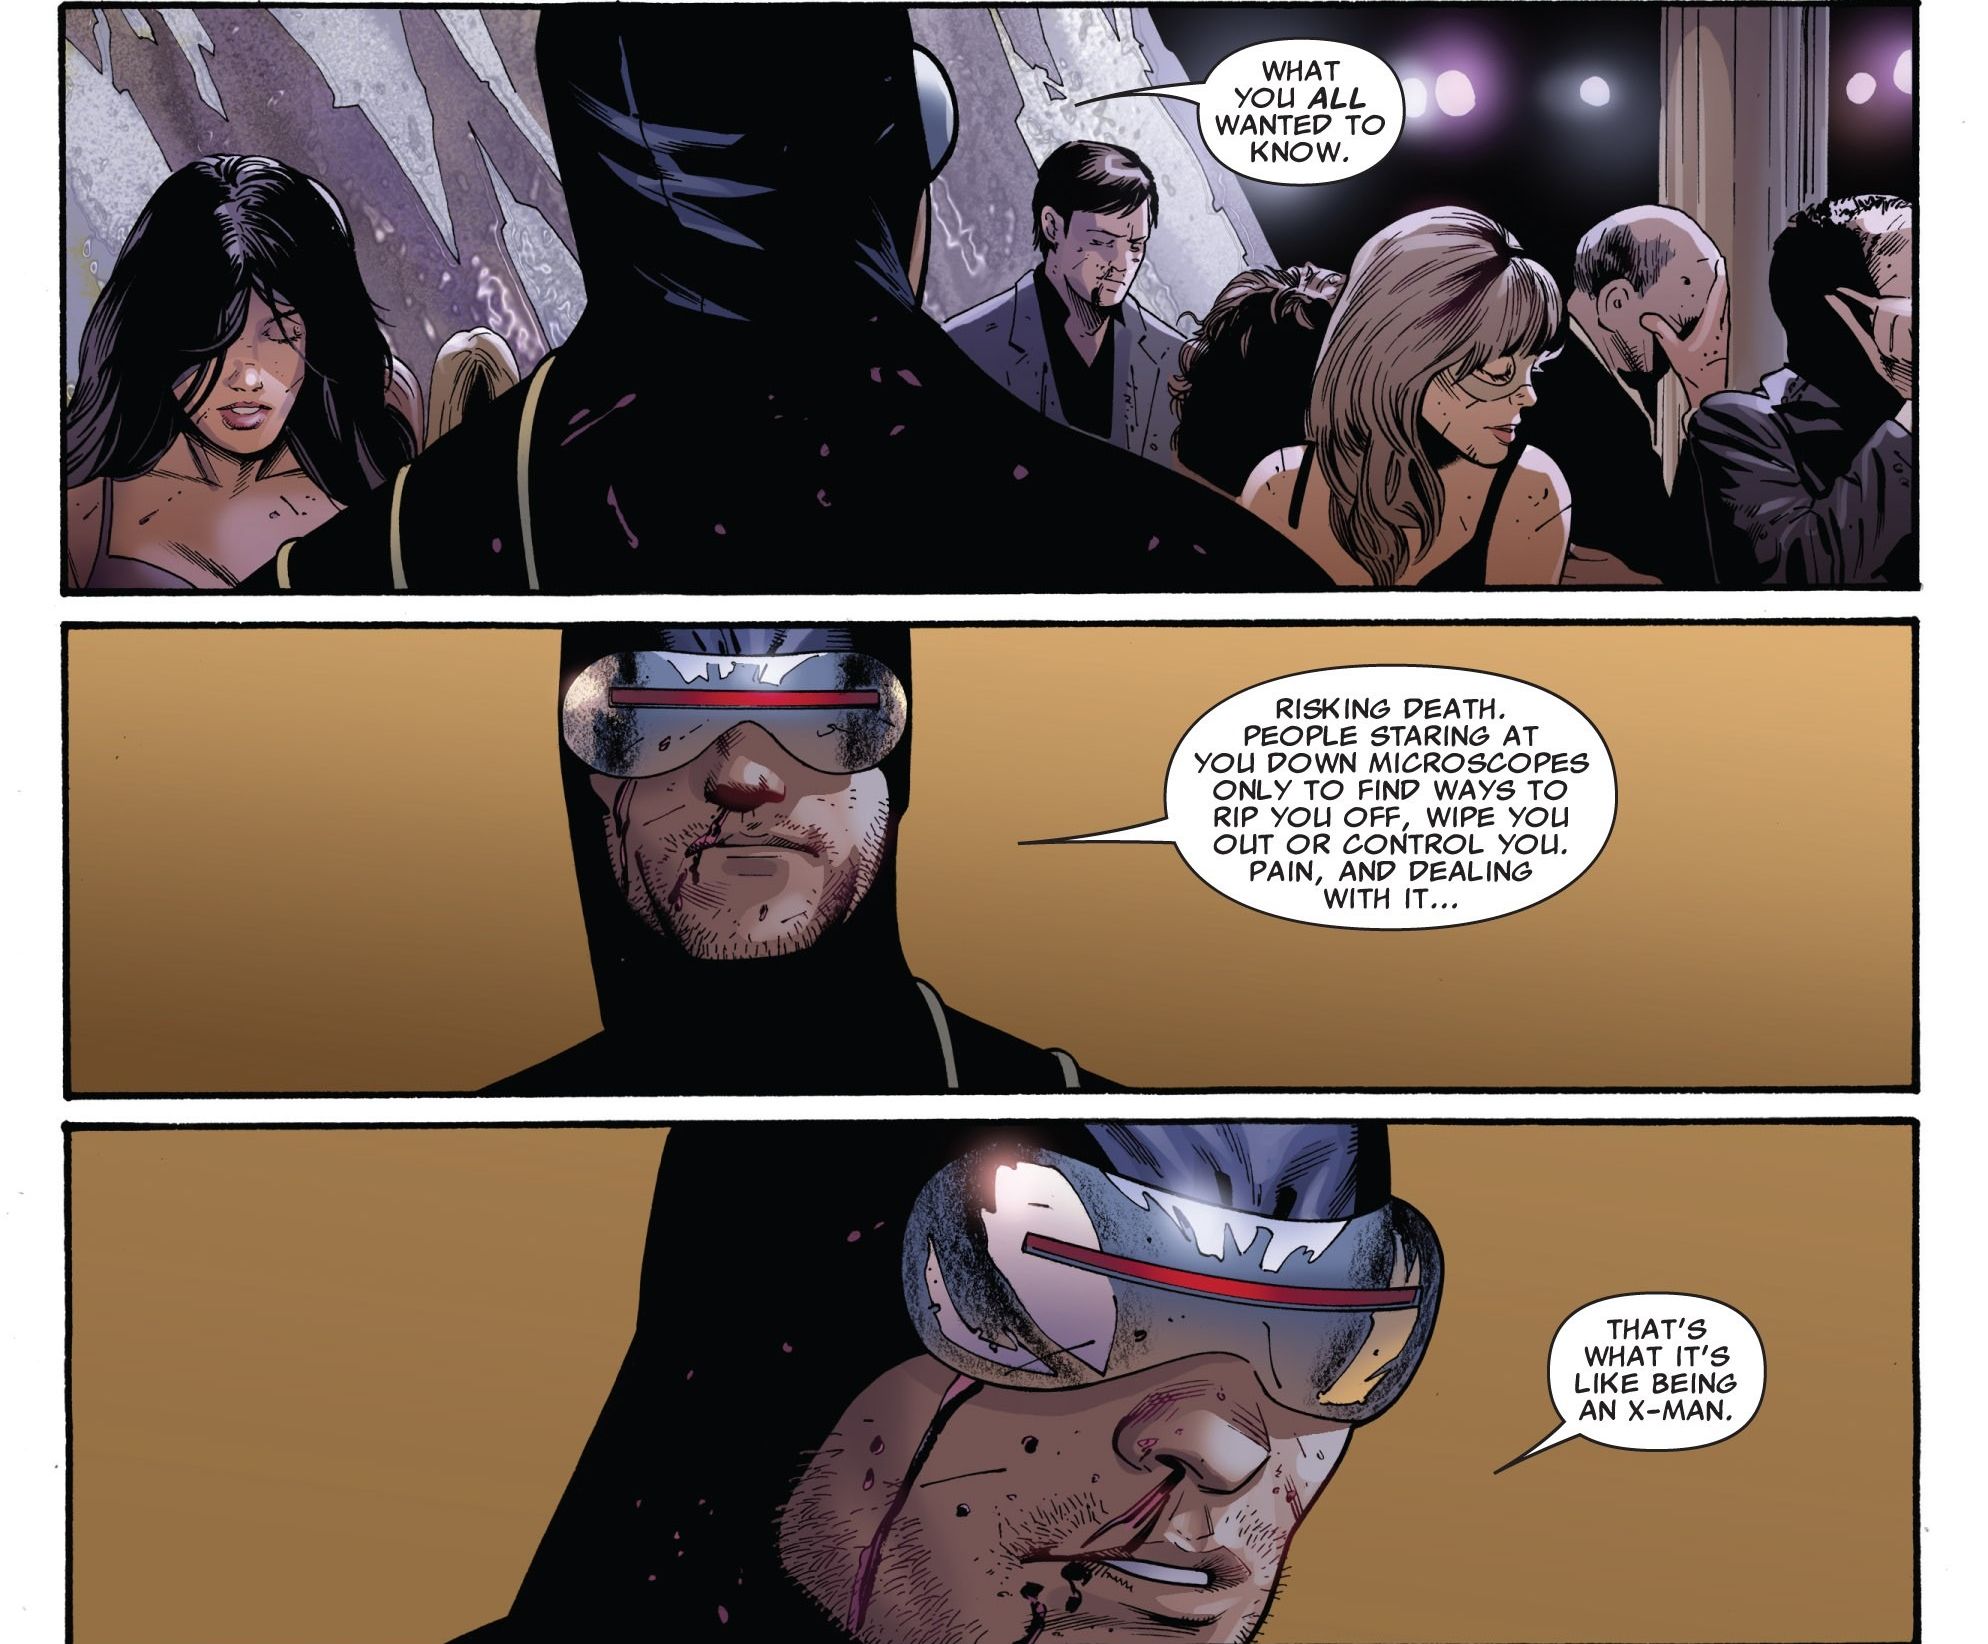 Cyclops addresses a crowd of people explaining that being an X-Man often means pain and scrutiny. 